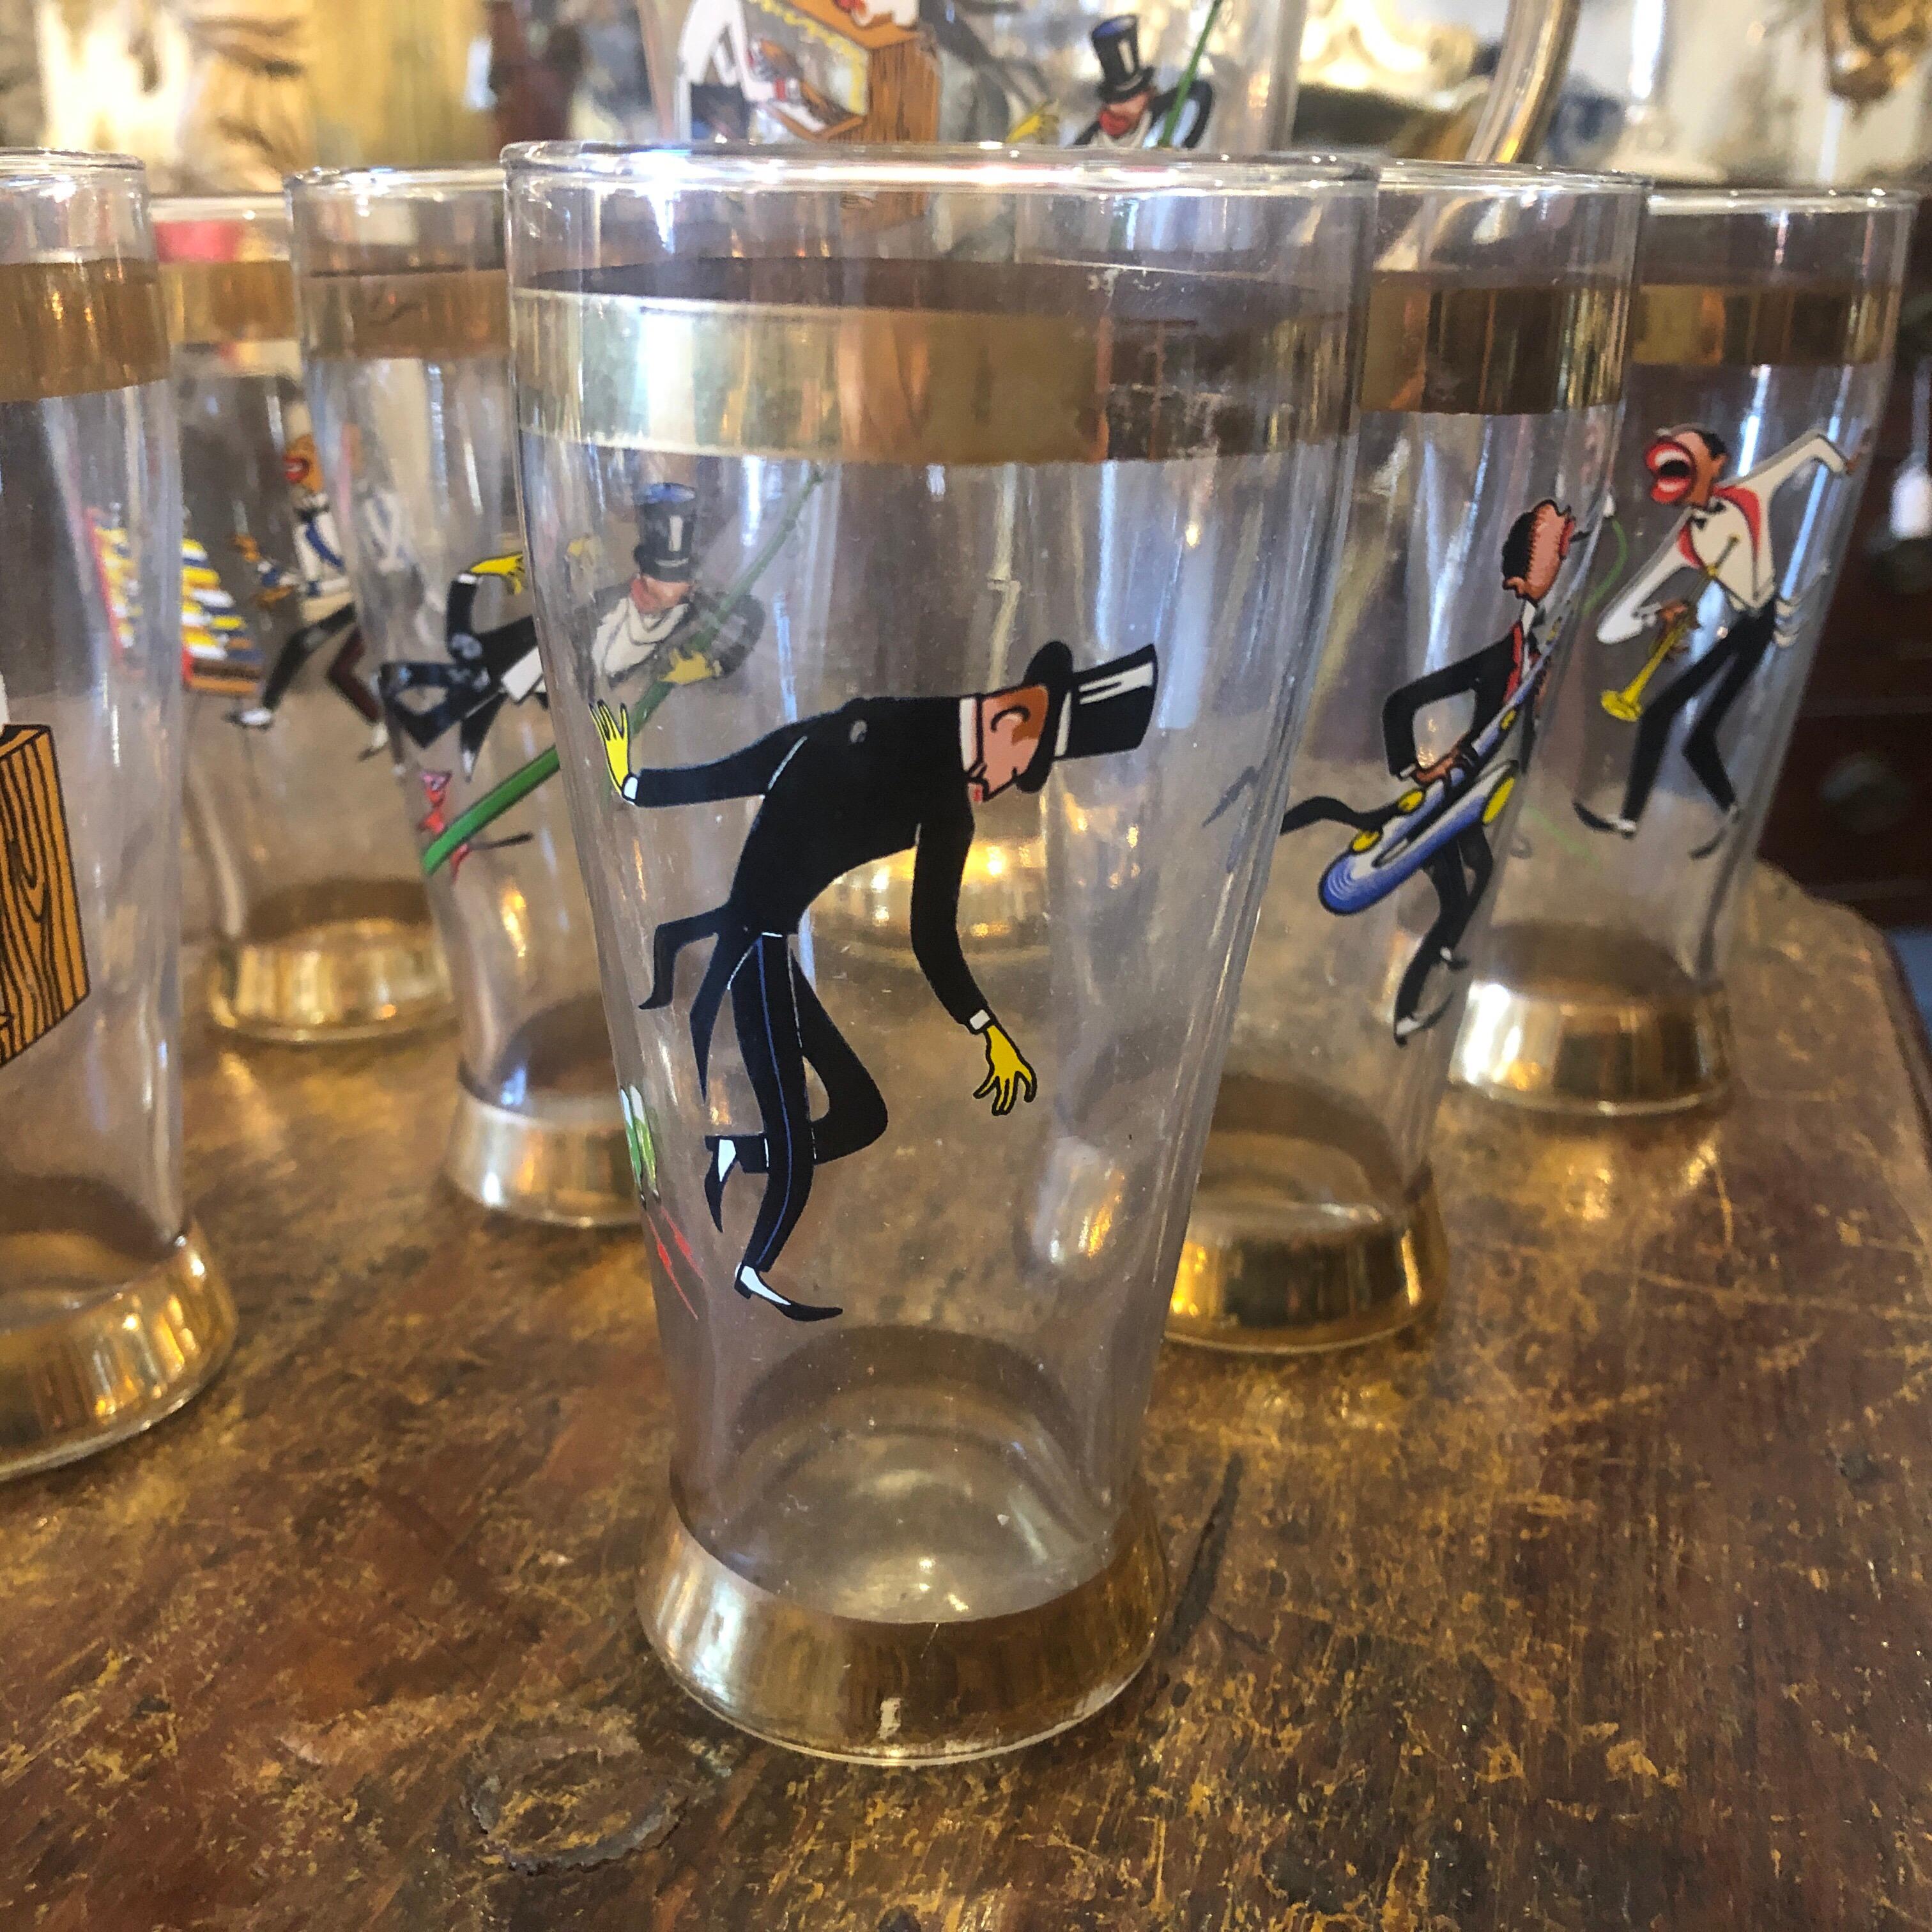 Amazing cocktail set, all glasses and bottle are decorated with different jazz musicians. Has been made in Italy in the 1950s. Good conditions overall, signs of the age. Original labeled by Decor, dimensions are of the pitcher, glasses height cm 14.